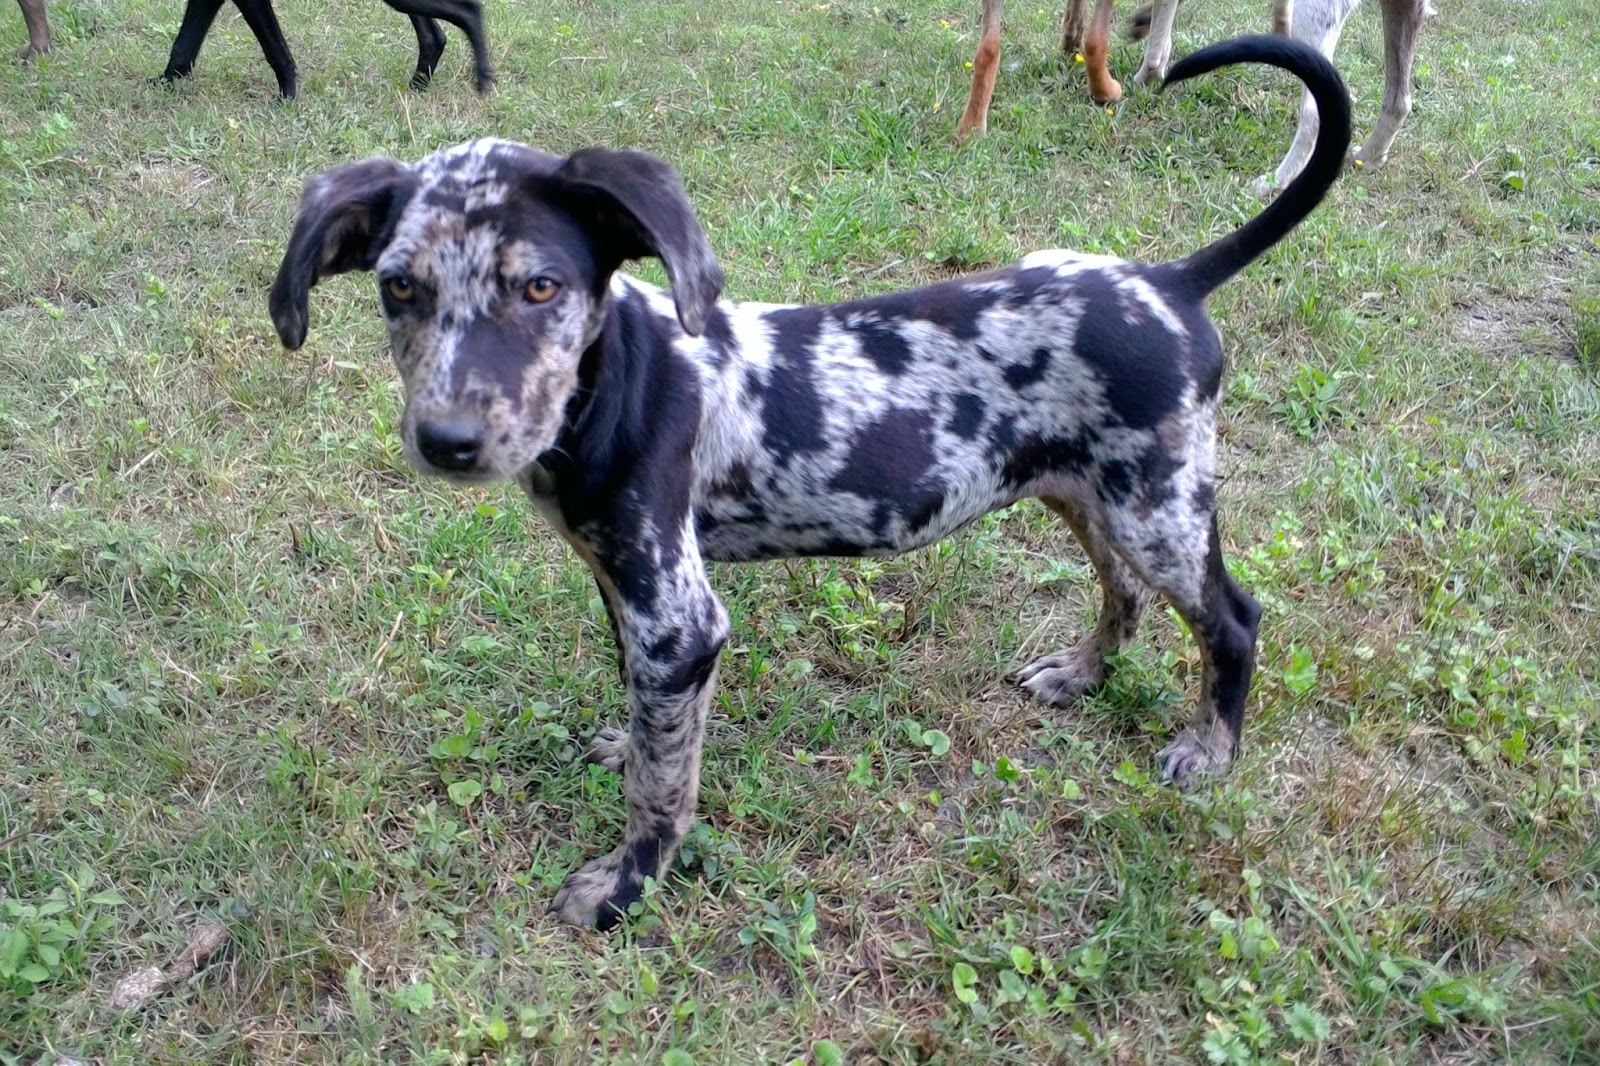 Catahoula Puppies: Louisiana Catahoula Puppies for sale, 4-6 month old1600 x 1066